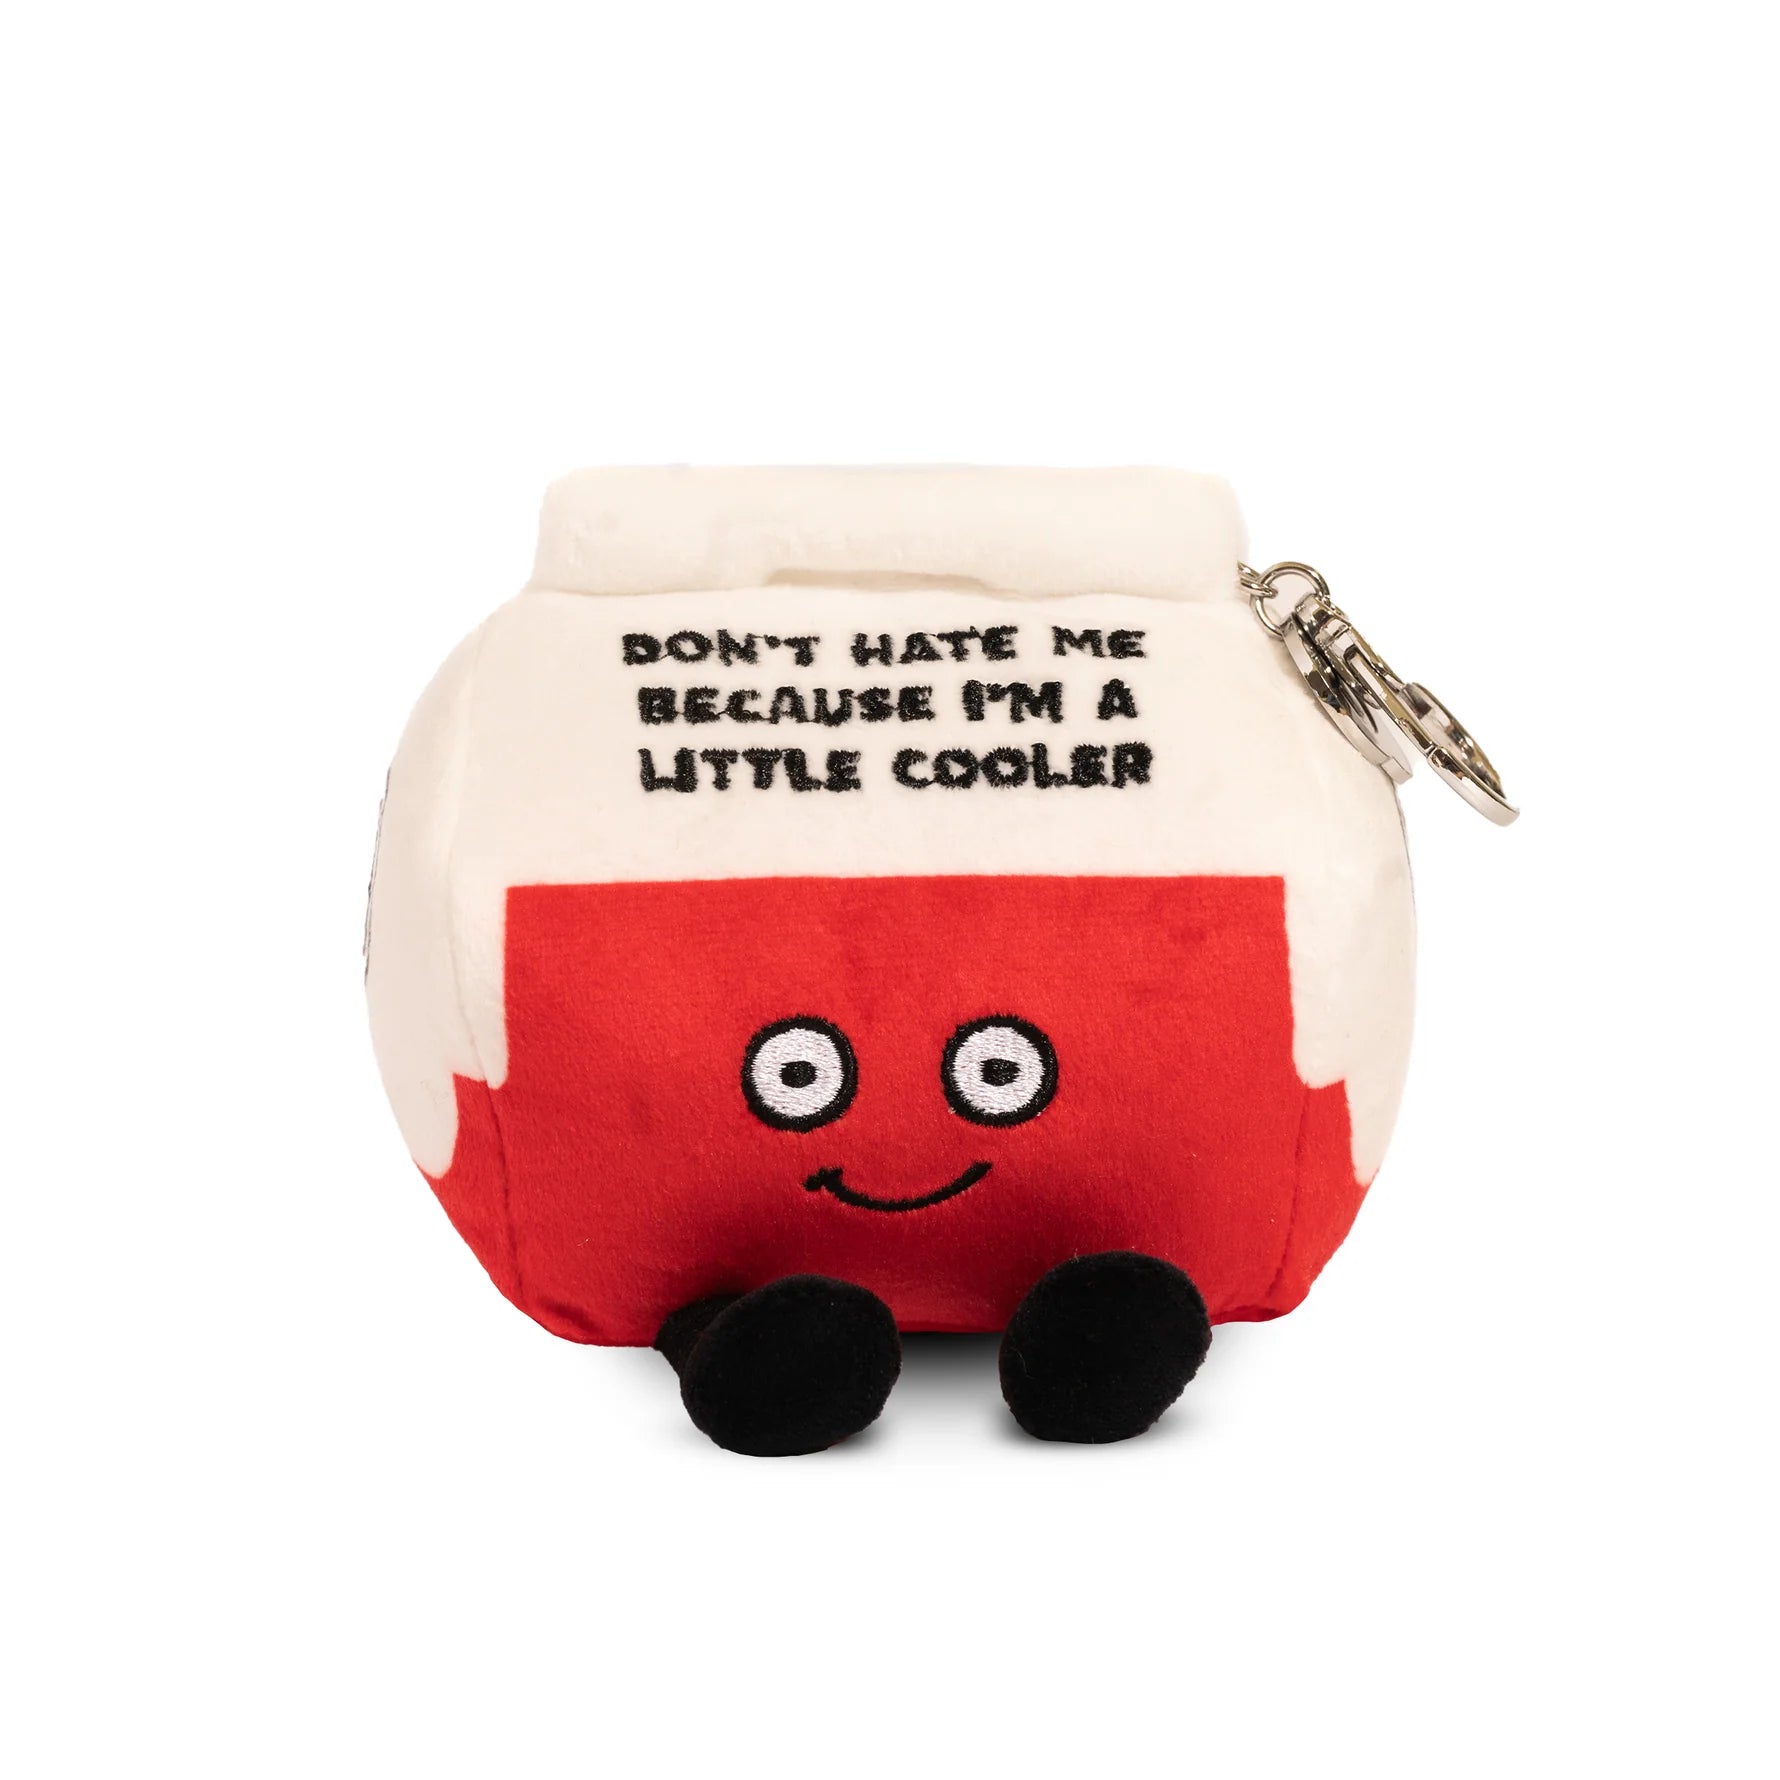 Punchkins Bag Clip Cooler "Don't Hate Me Because I'm a Little Cooler" - Treasure Island Toys